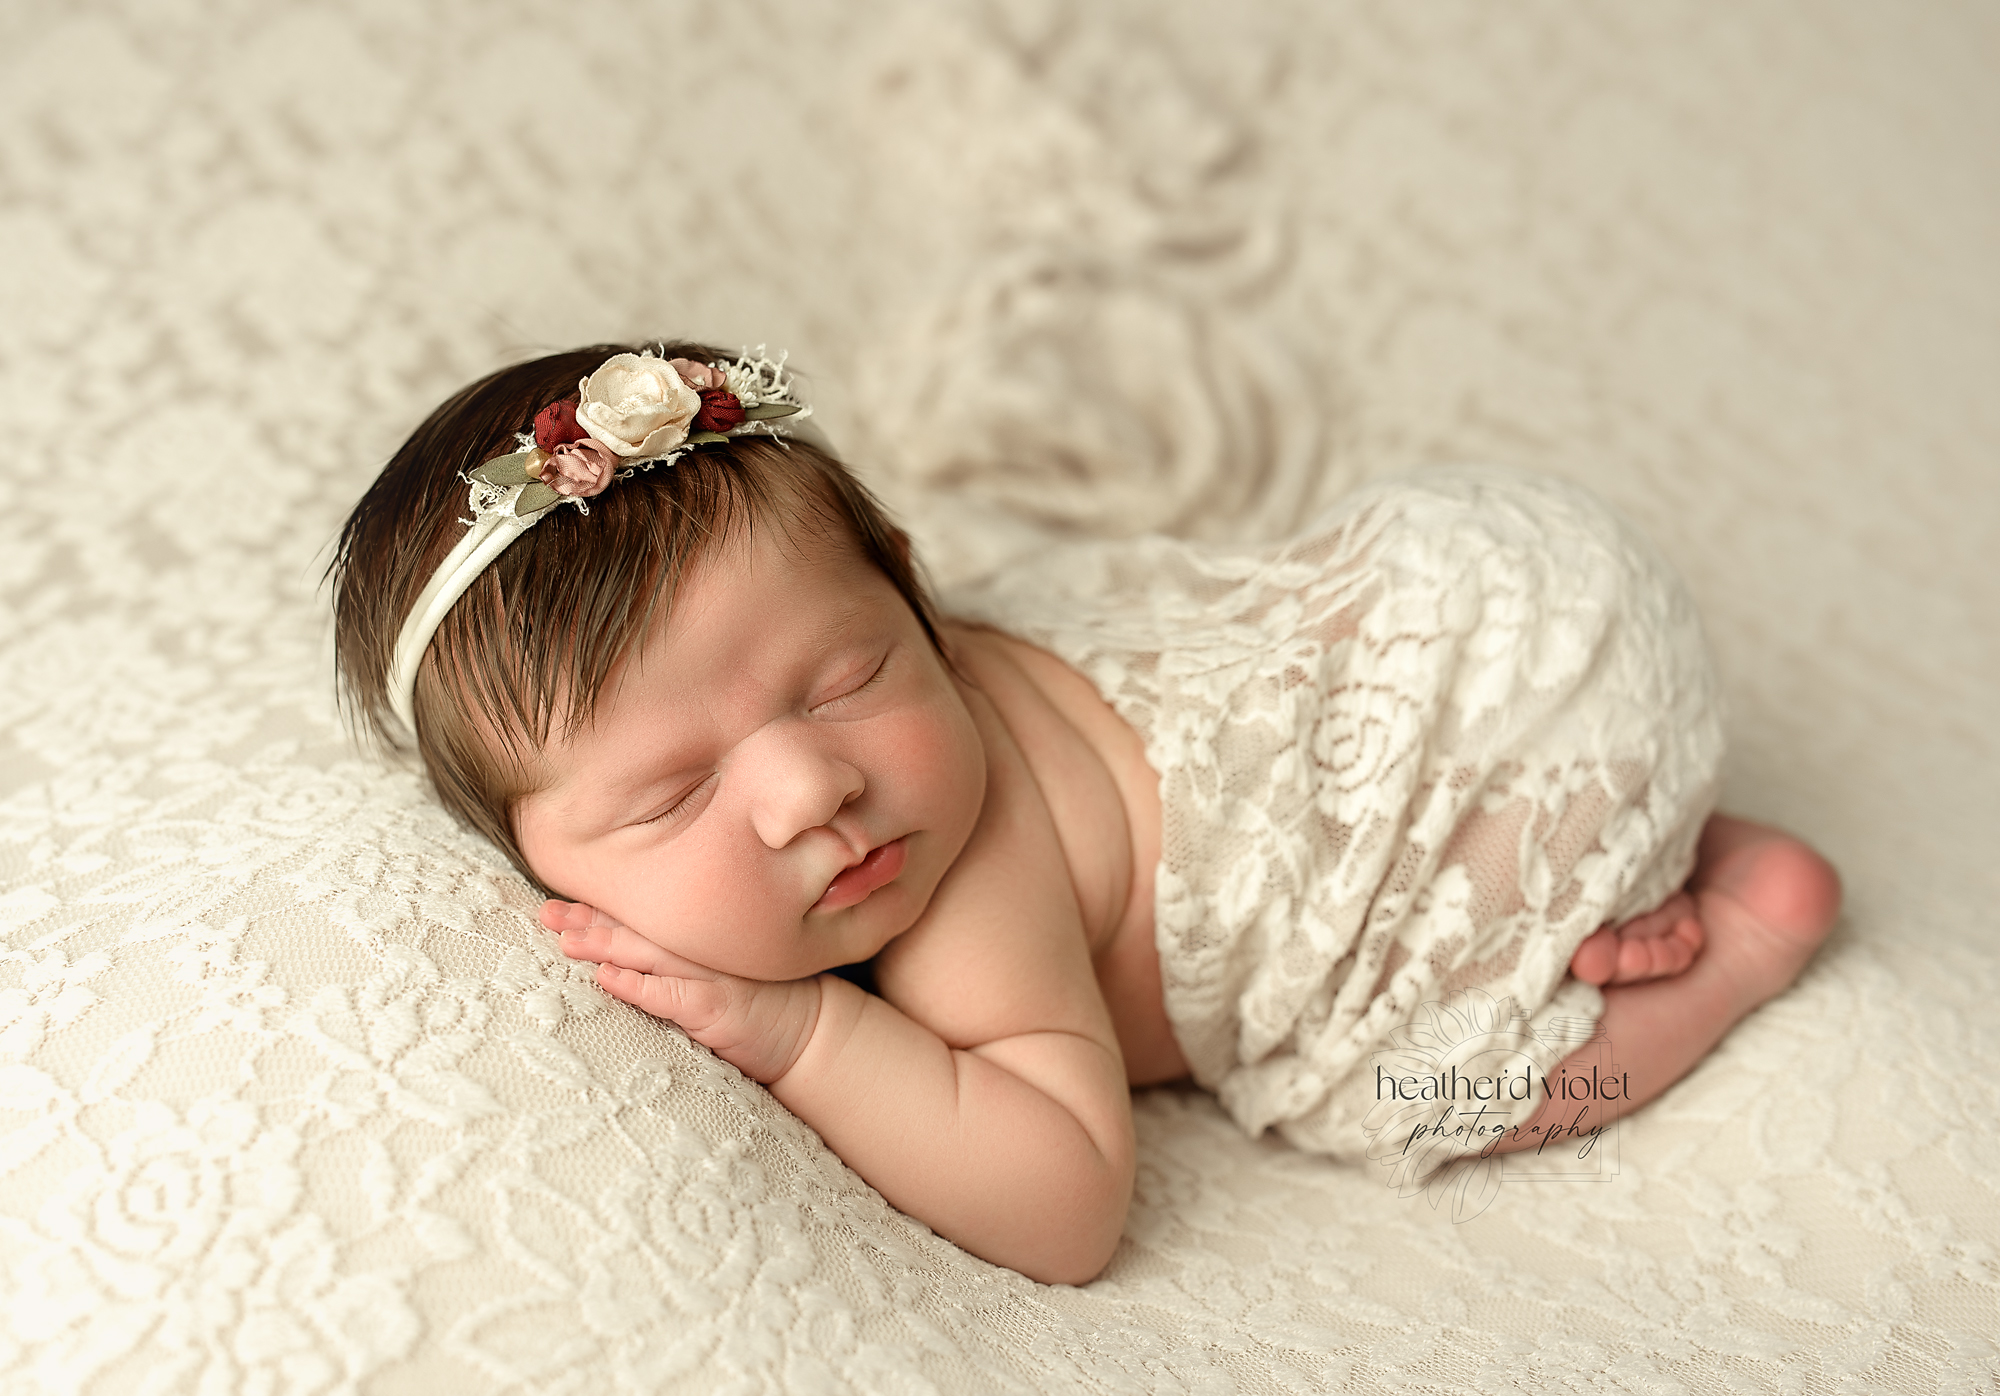 baby photography session Lafayette IN, baby photography packages, newborn baby photographer near me